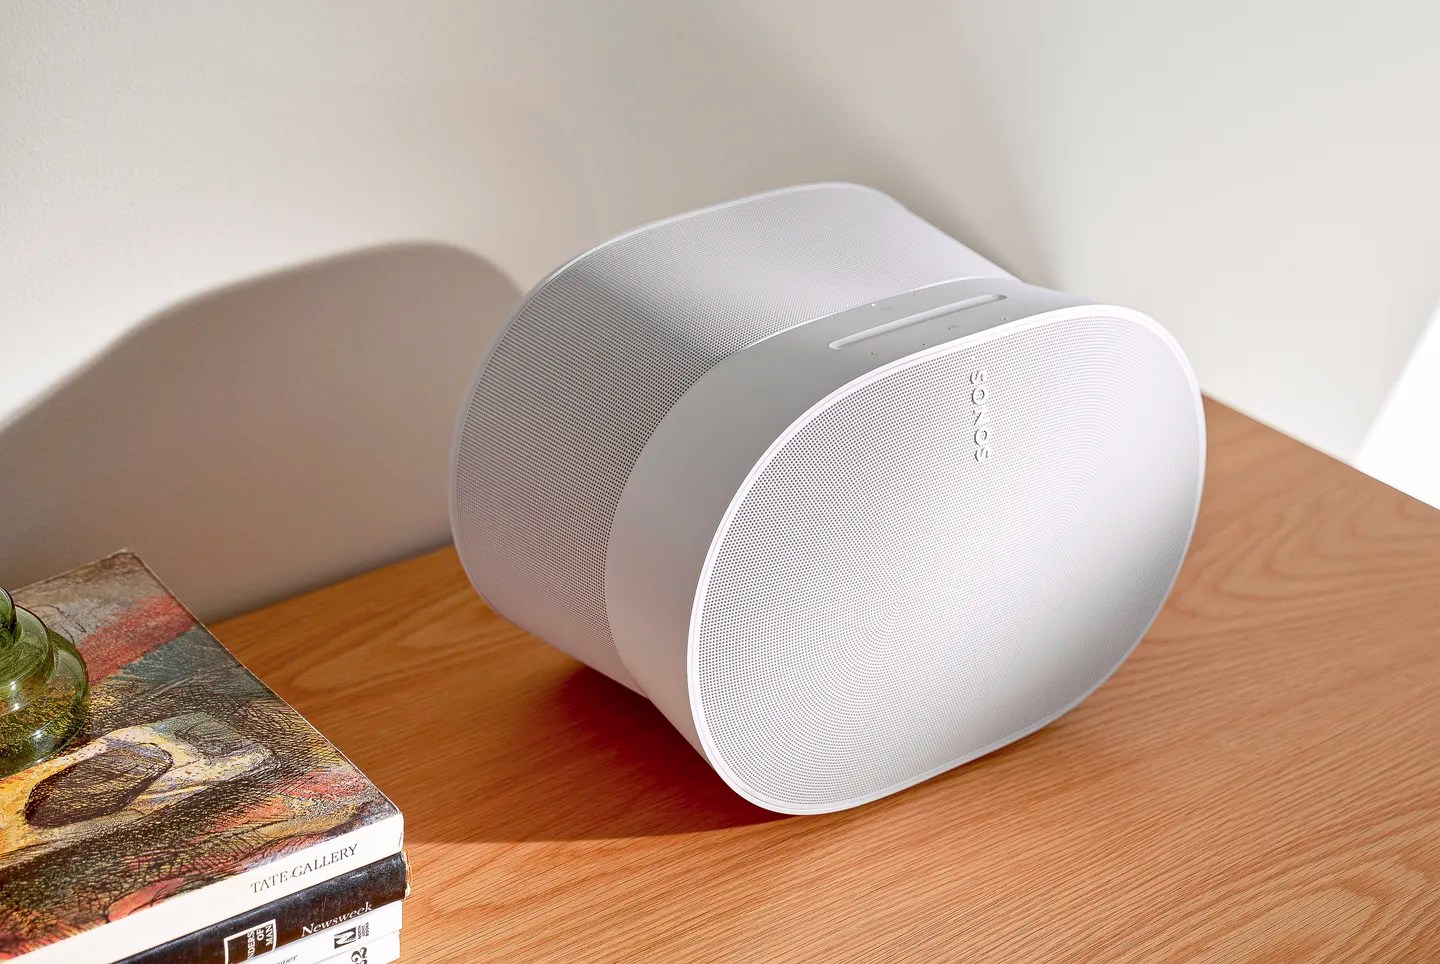 Images of the unreleased Sonos Era speakers have leaked